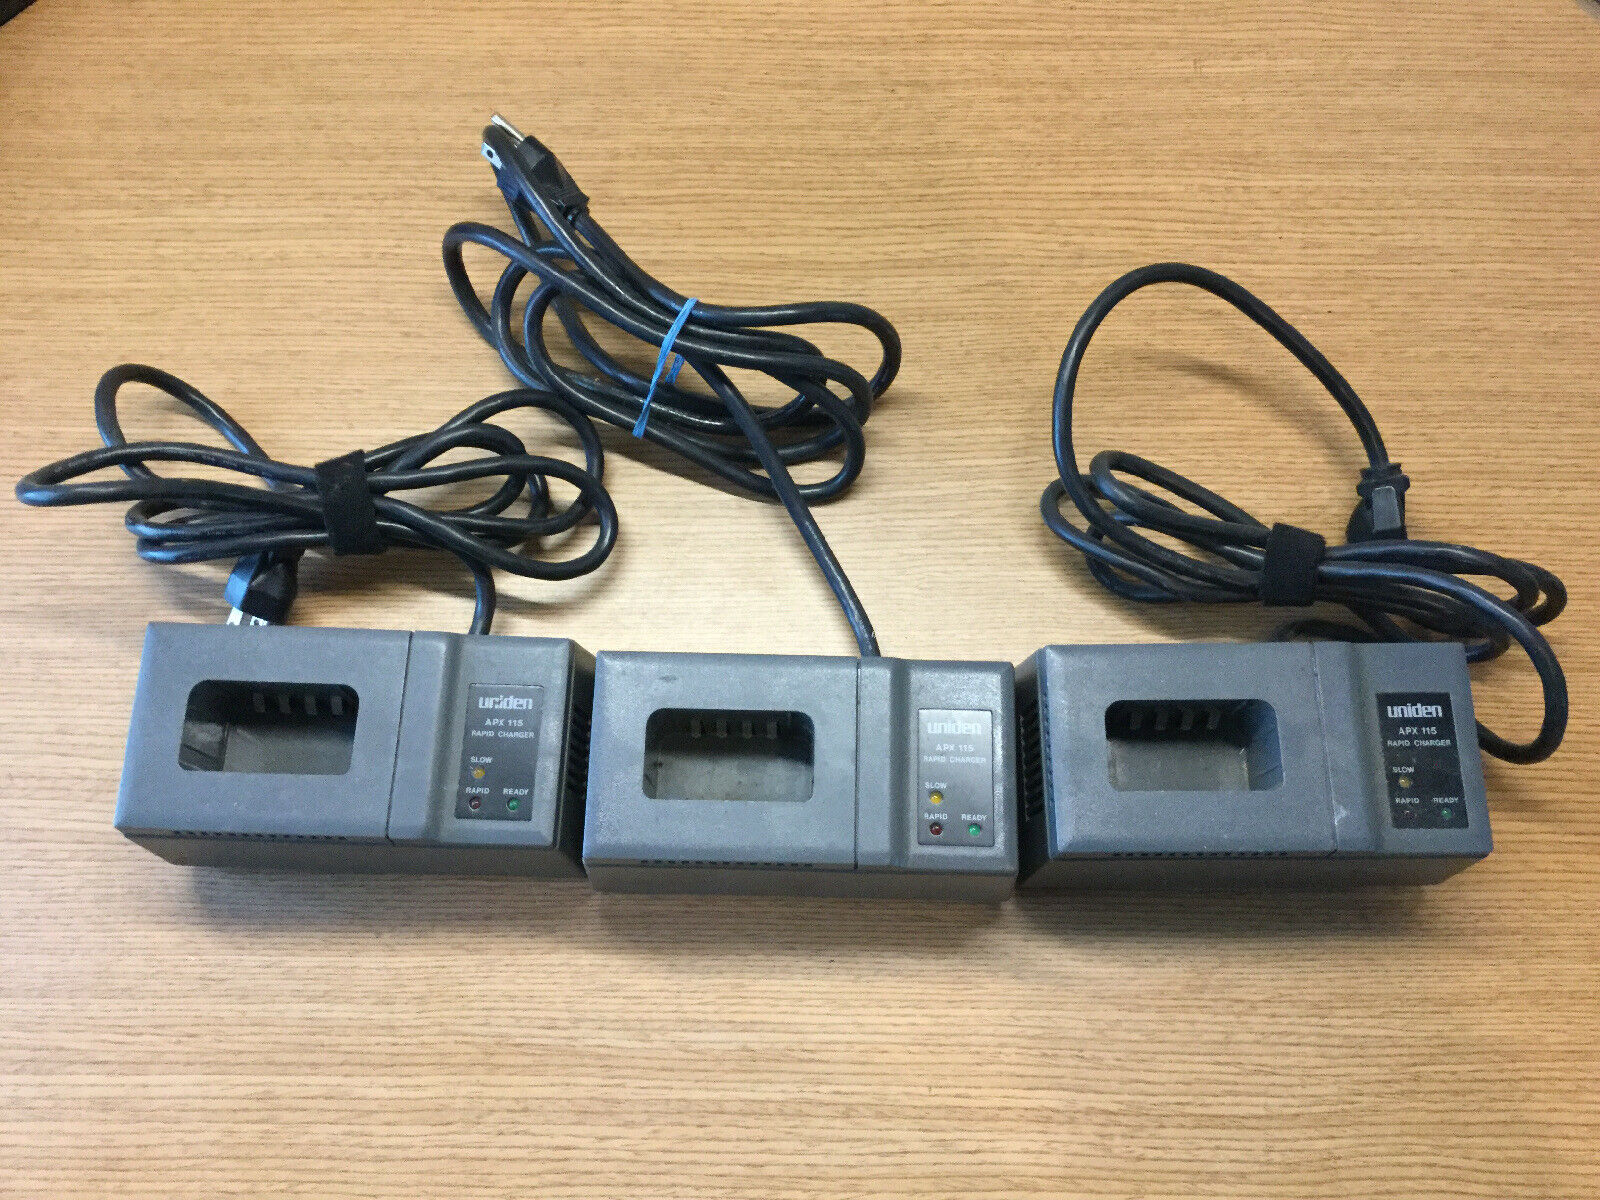 Uniden Apx115 Rapid Charger Sp1100 Sp310-tx Sps301 Sps310-tx Sps320-ts Lot Of 3